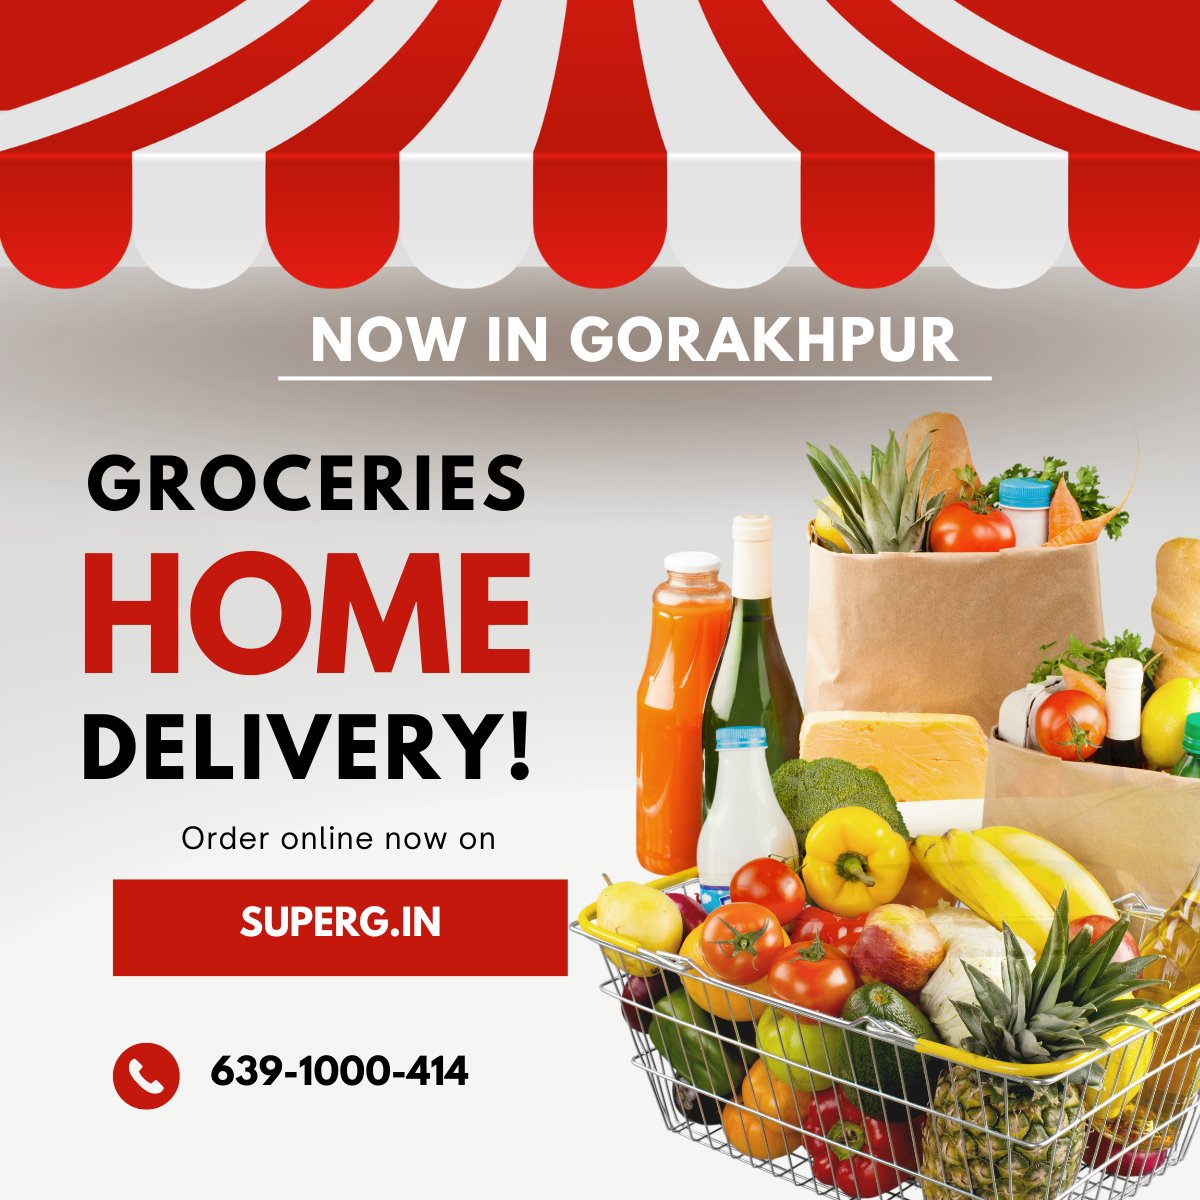 Online Grocery Delivery in Gorakhpur
superg.in
#groceryshopping #grocery #grocerystore #groceryhaul #grocerygetter #grocerydelivery #grocerylist #grocerystores #groceryday #grocerycart #grocerygirls #grocerylife #grocerytime #groceryshop #groceryoutlet